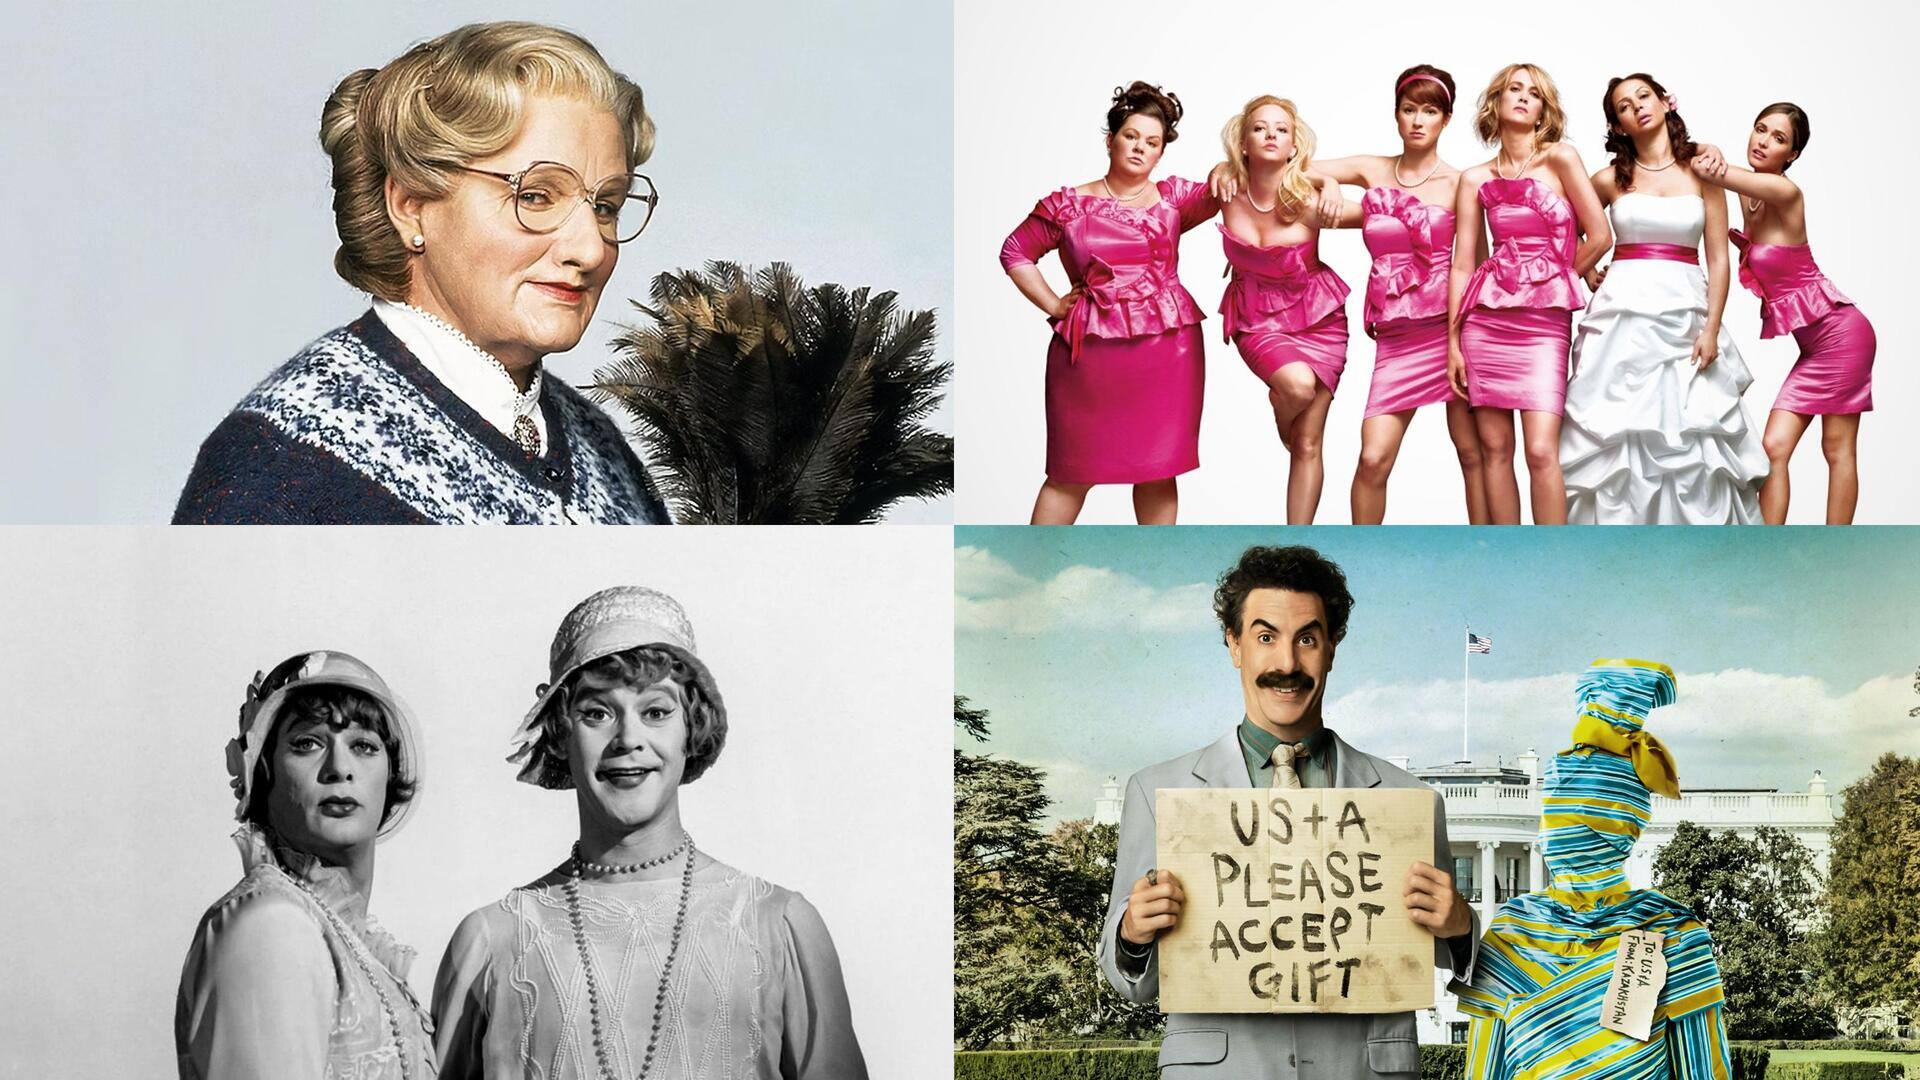 'Mrs. Doubtfire' to 'Bridesmaids': Best Hollywood comedy movies